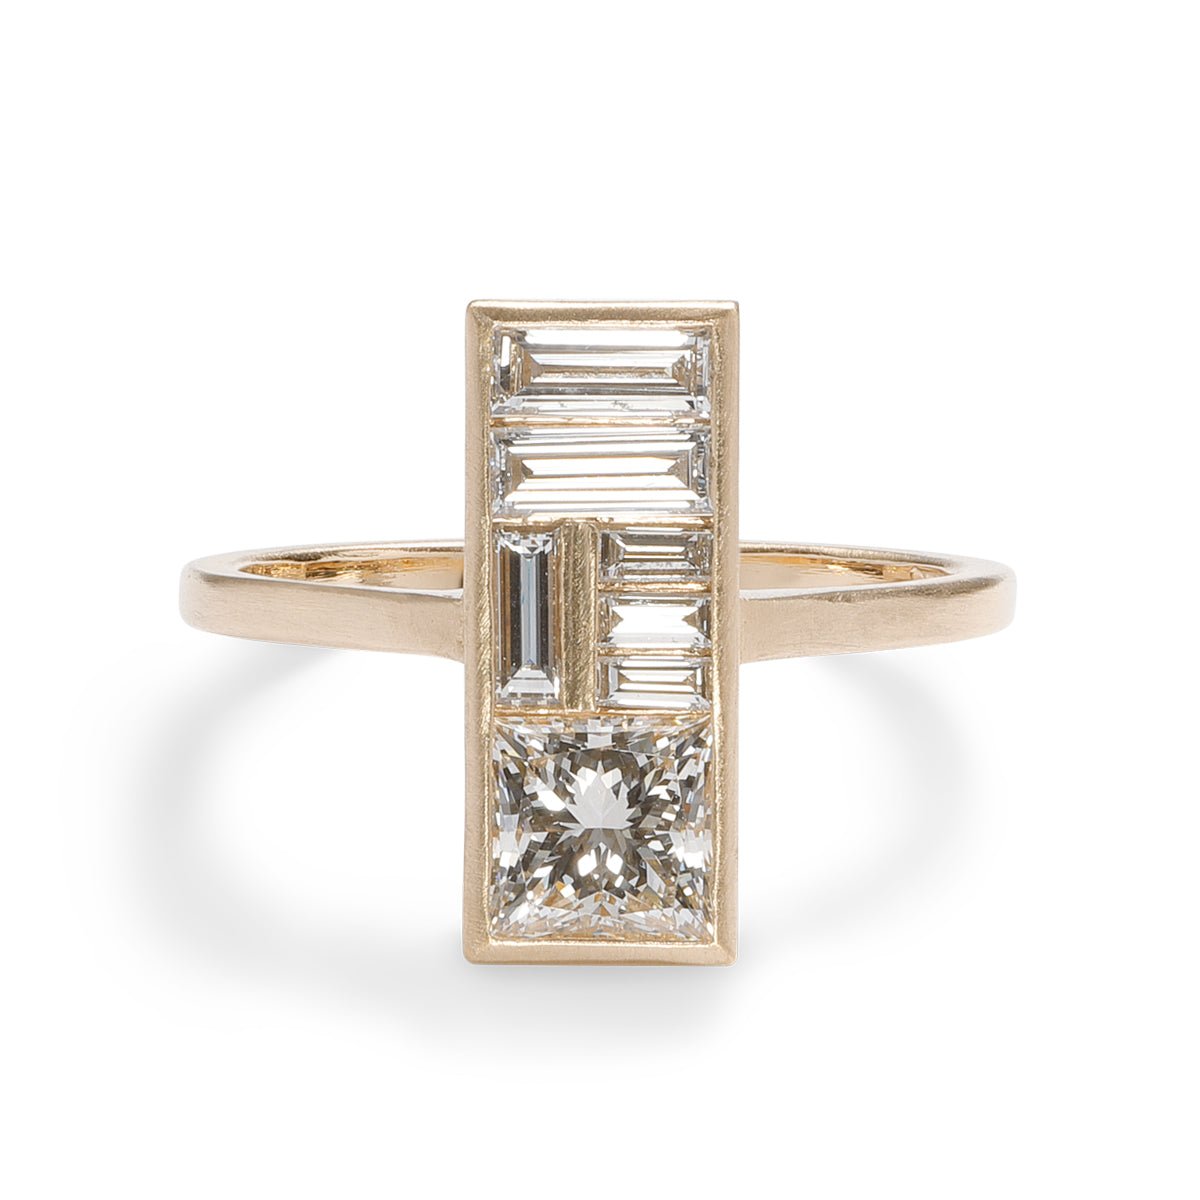 Rectangular Miro ring, designed and made in Portland, Oregon. Features lab-grown diamonds set in 14K recycled gold.